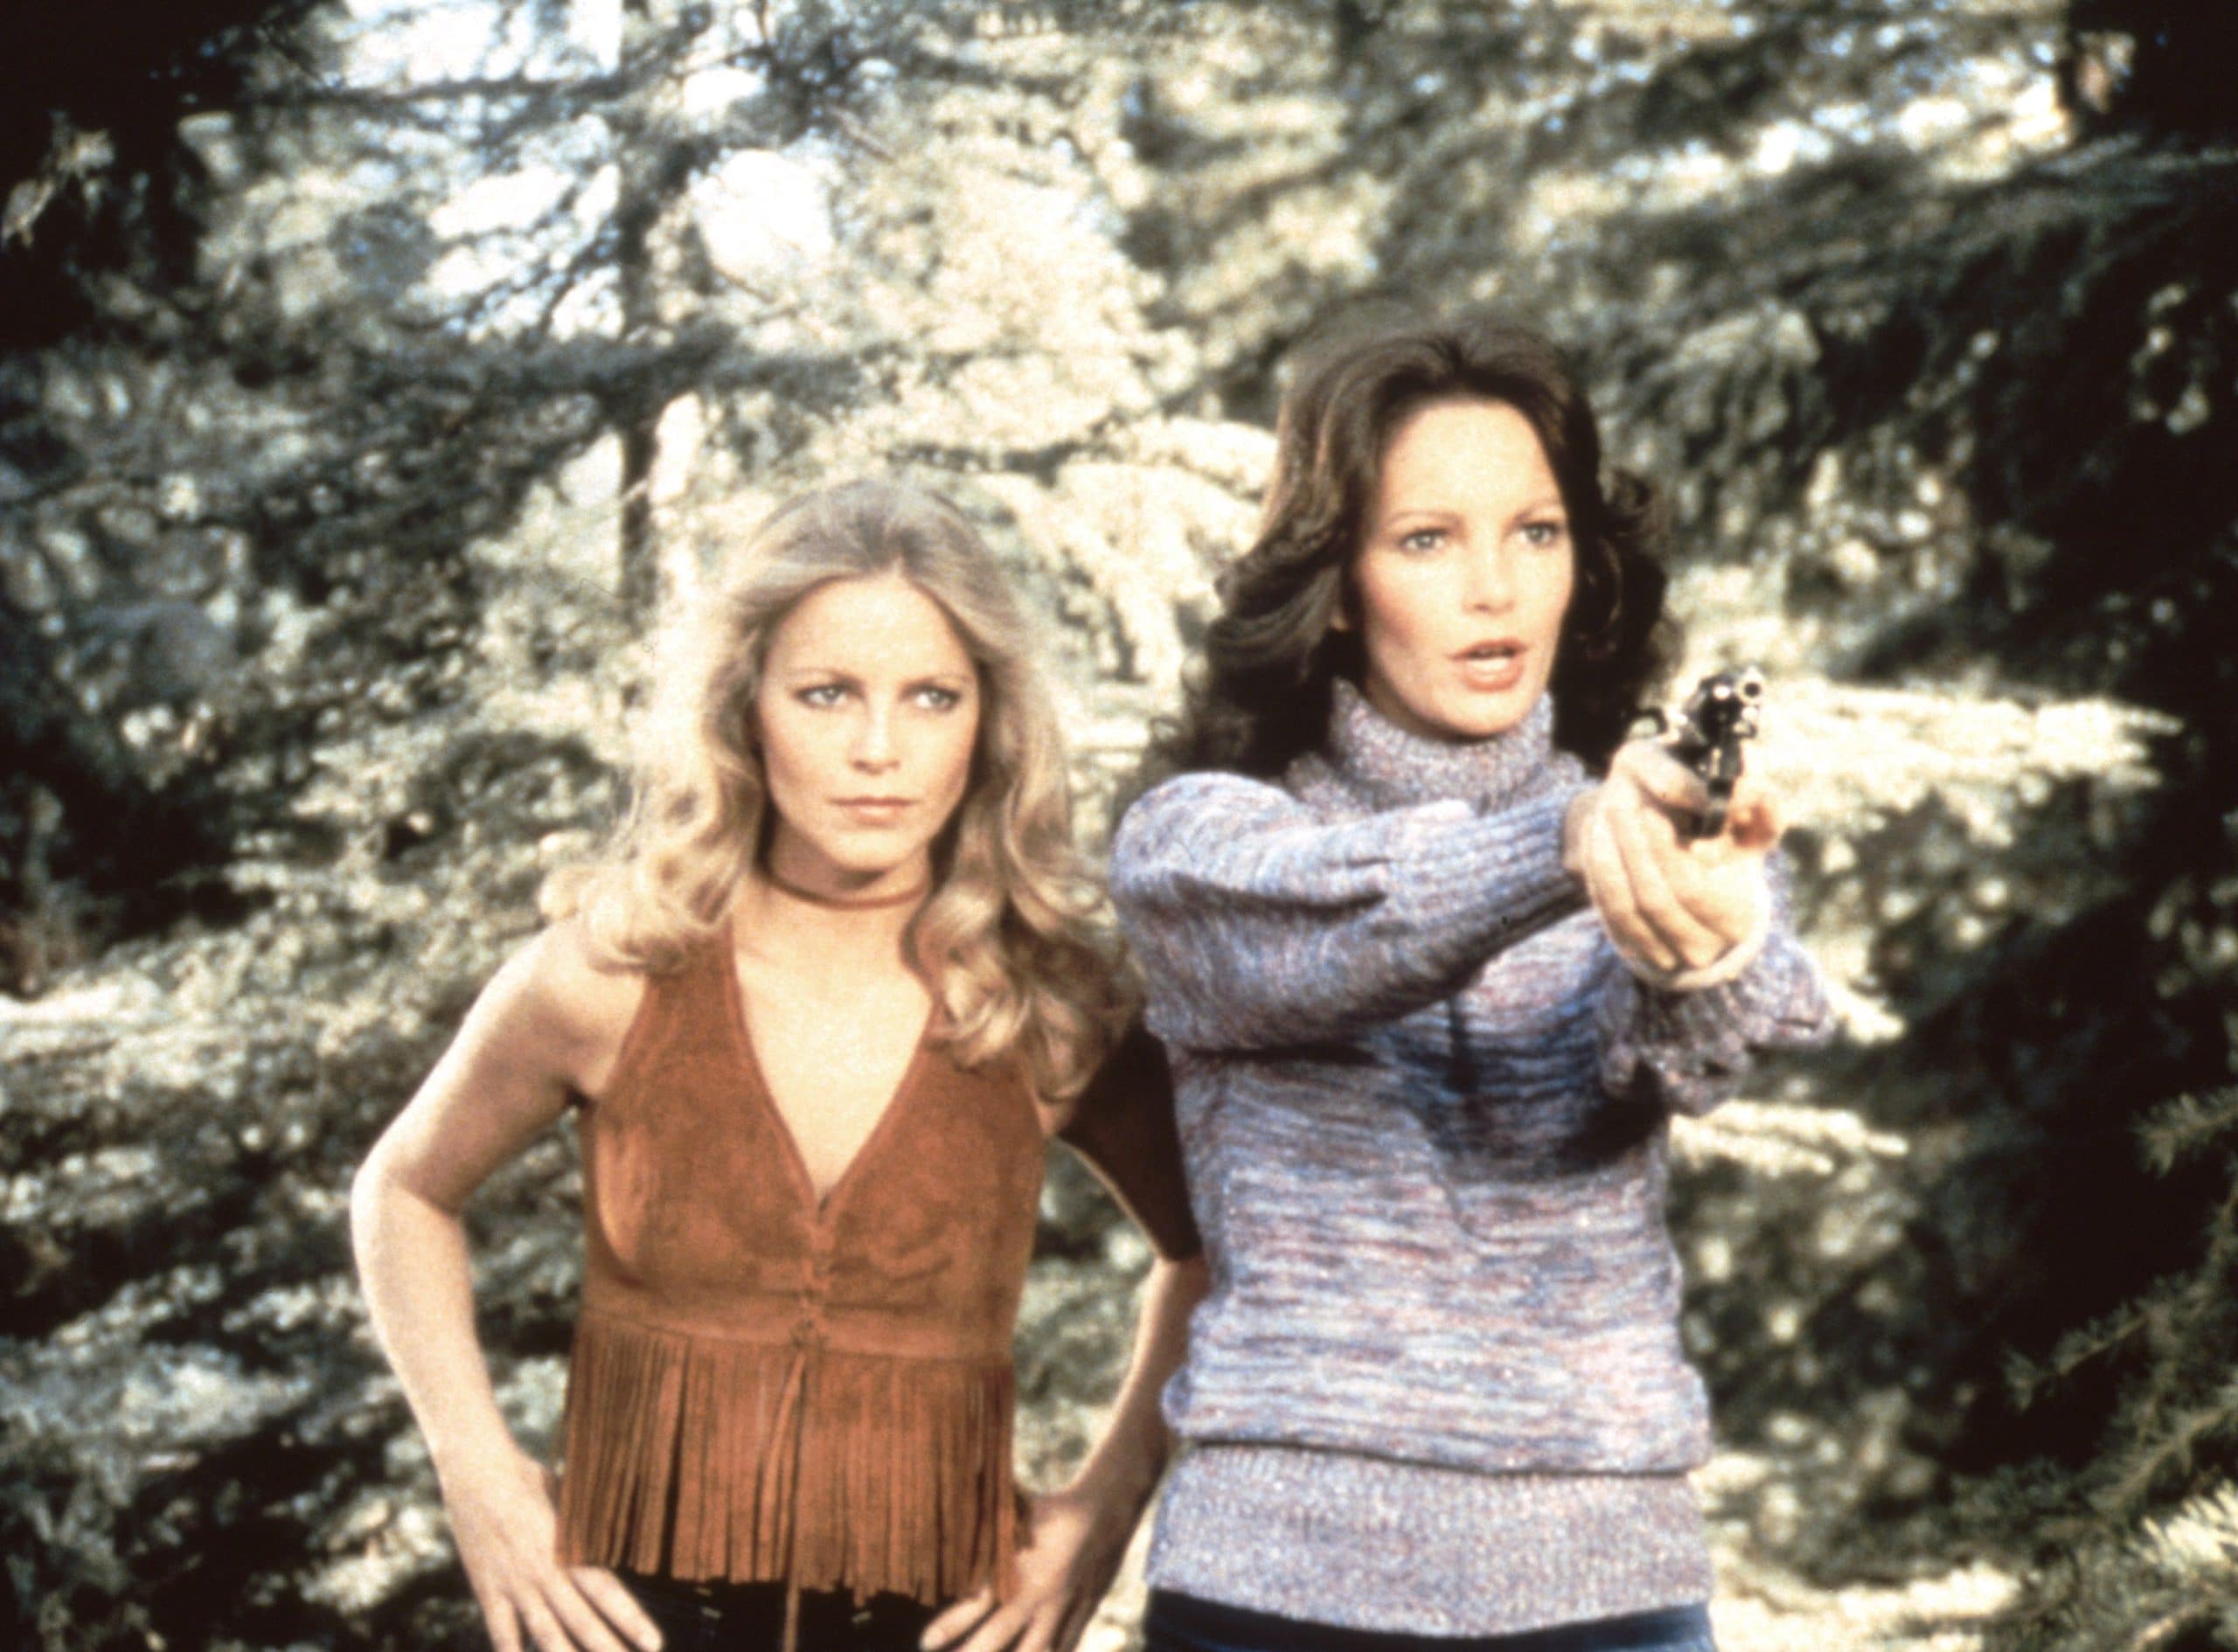 CHARLIE'S ANGELS, (from left): Cheryl Ladd, Jaclyn Smith, 1976-1981